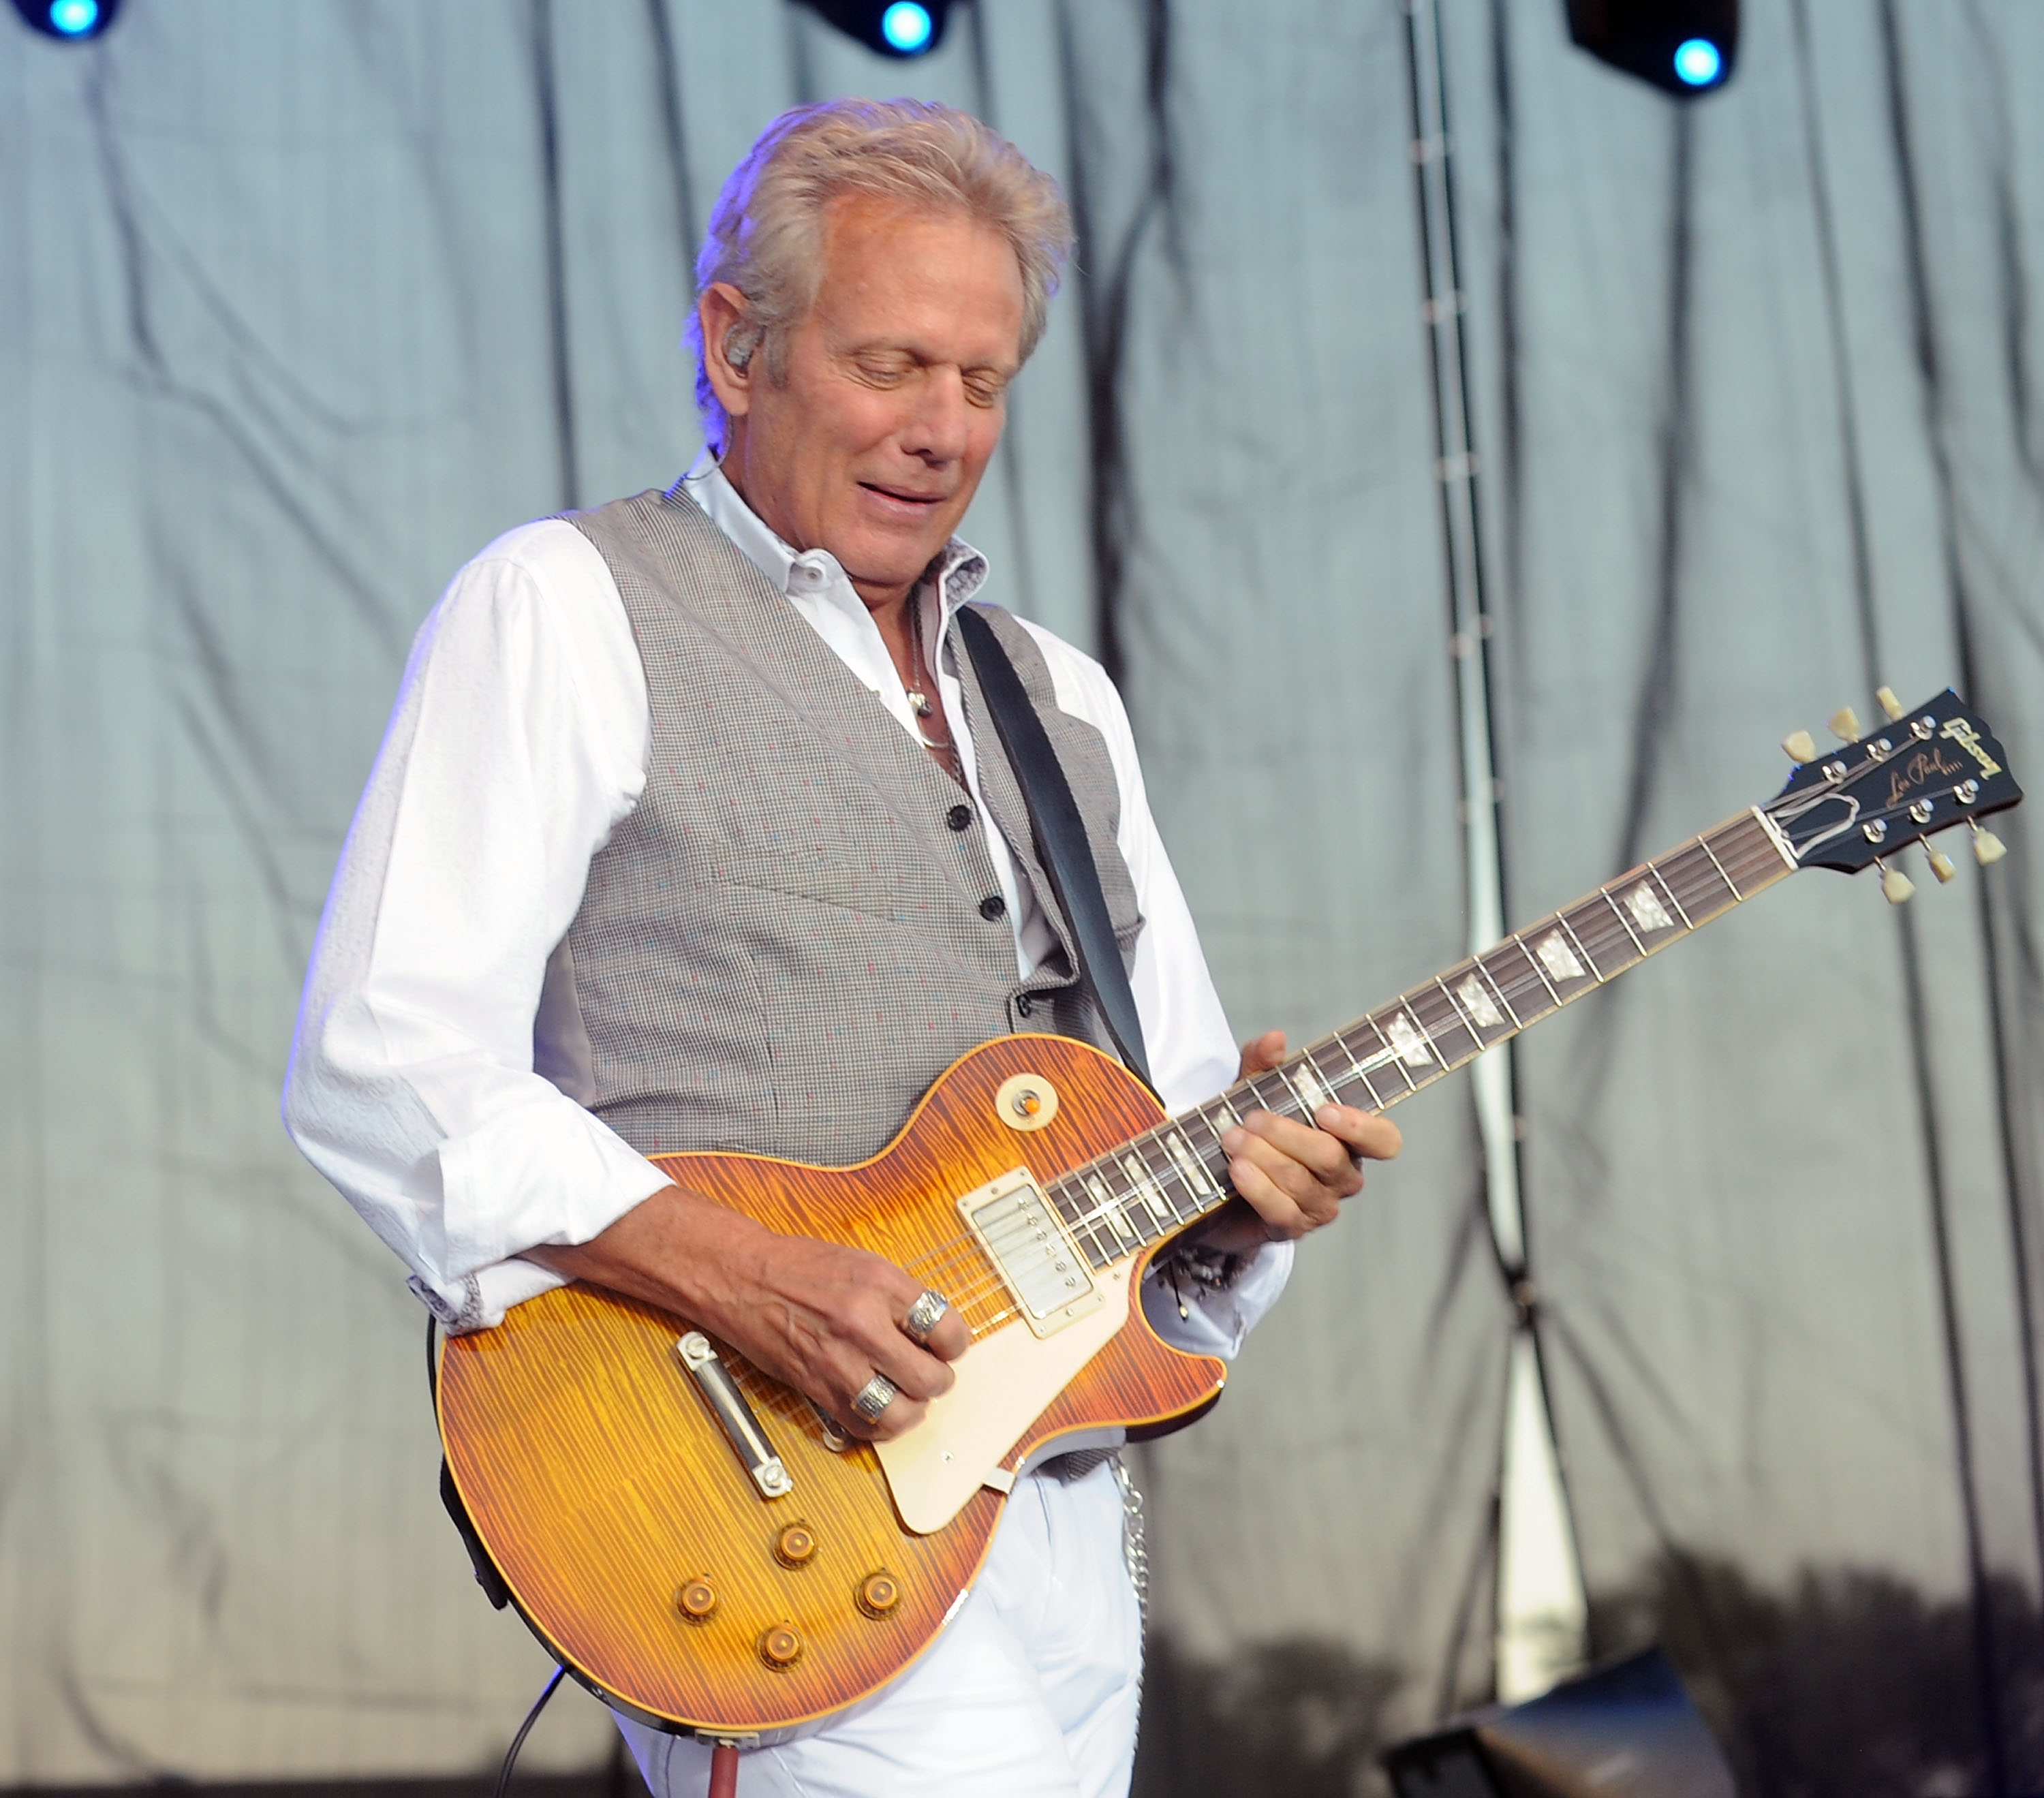 Don Felder of The Eagles performs at the 33rd Annual Quick Chek New Jersey Festival Of Ballooning - Day 1 at Solberg Airport on July 24, 2015 in Readington, New Jersey. (Bobby Bank—2015 Bobby Bank)